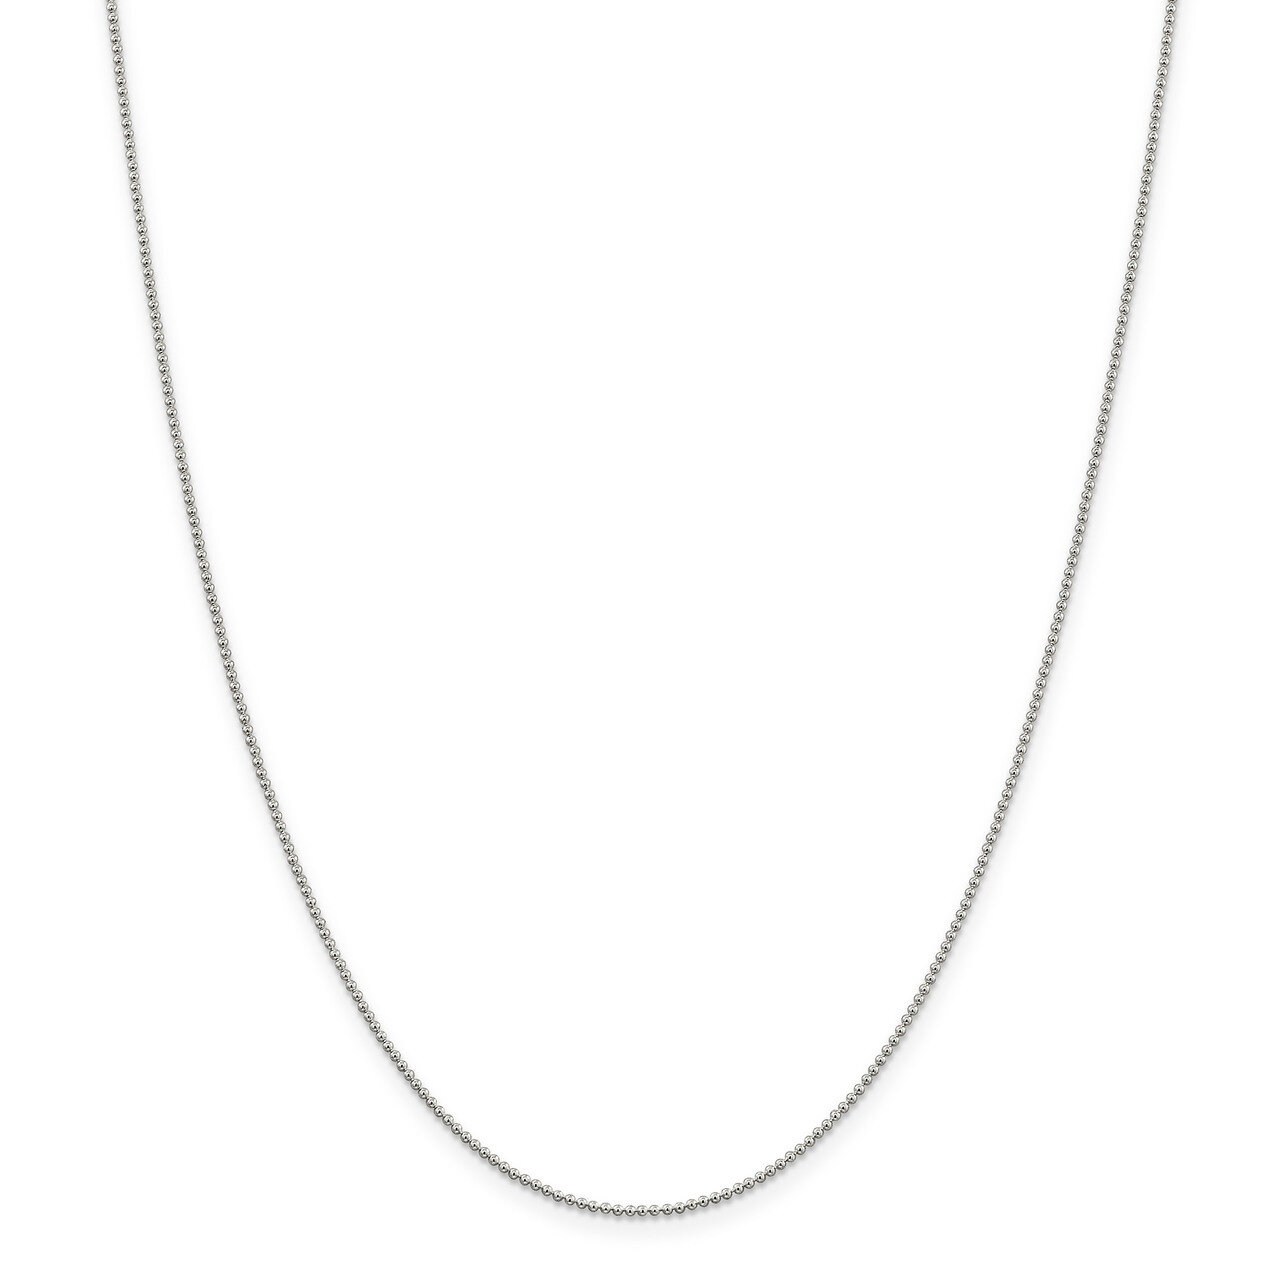 24 Inch 1.25mm Beaded Chain Sterling Silver QK80-24